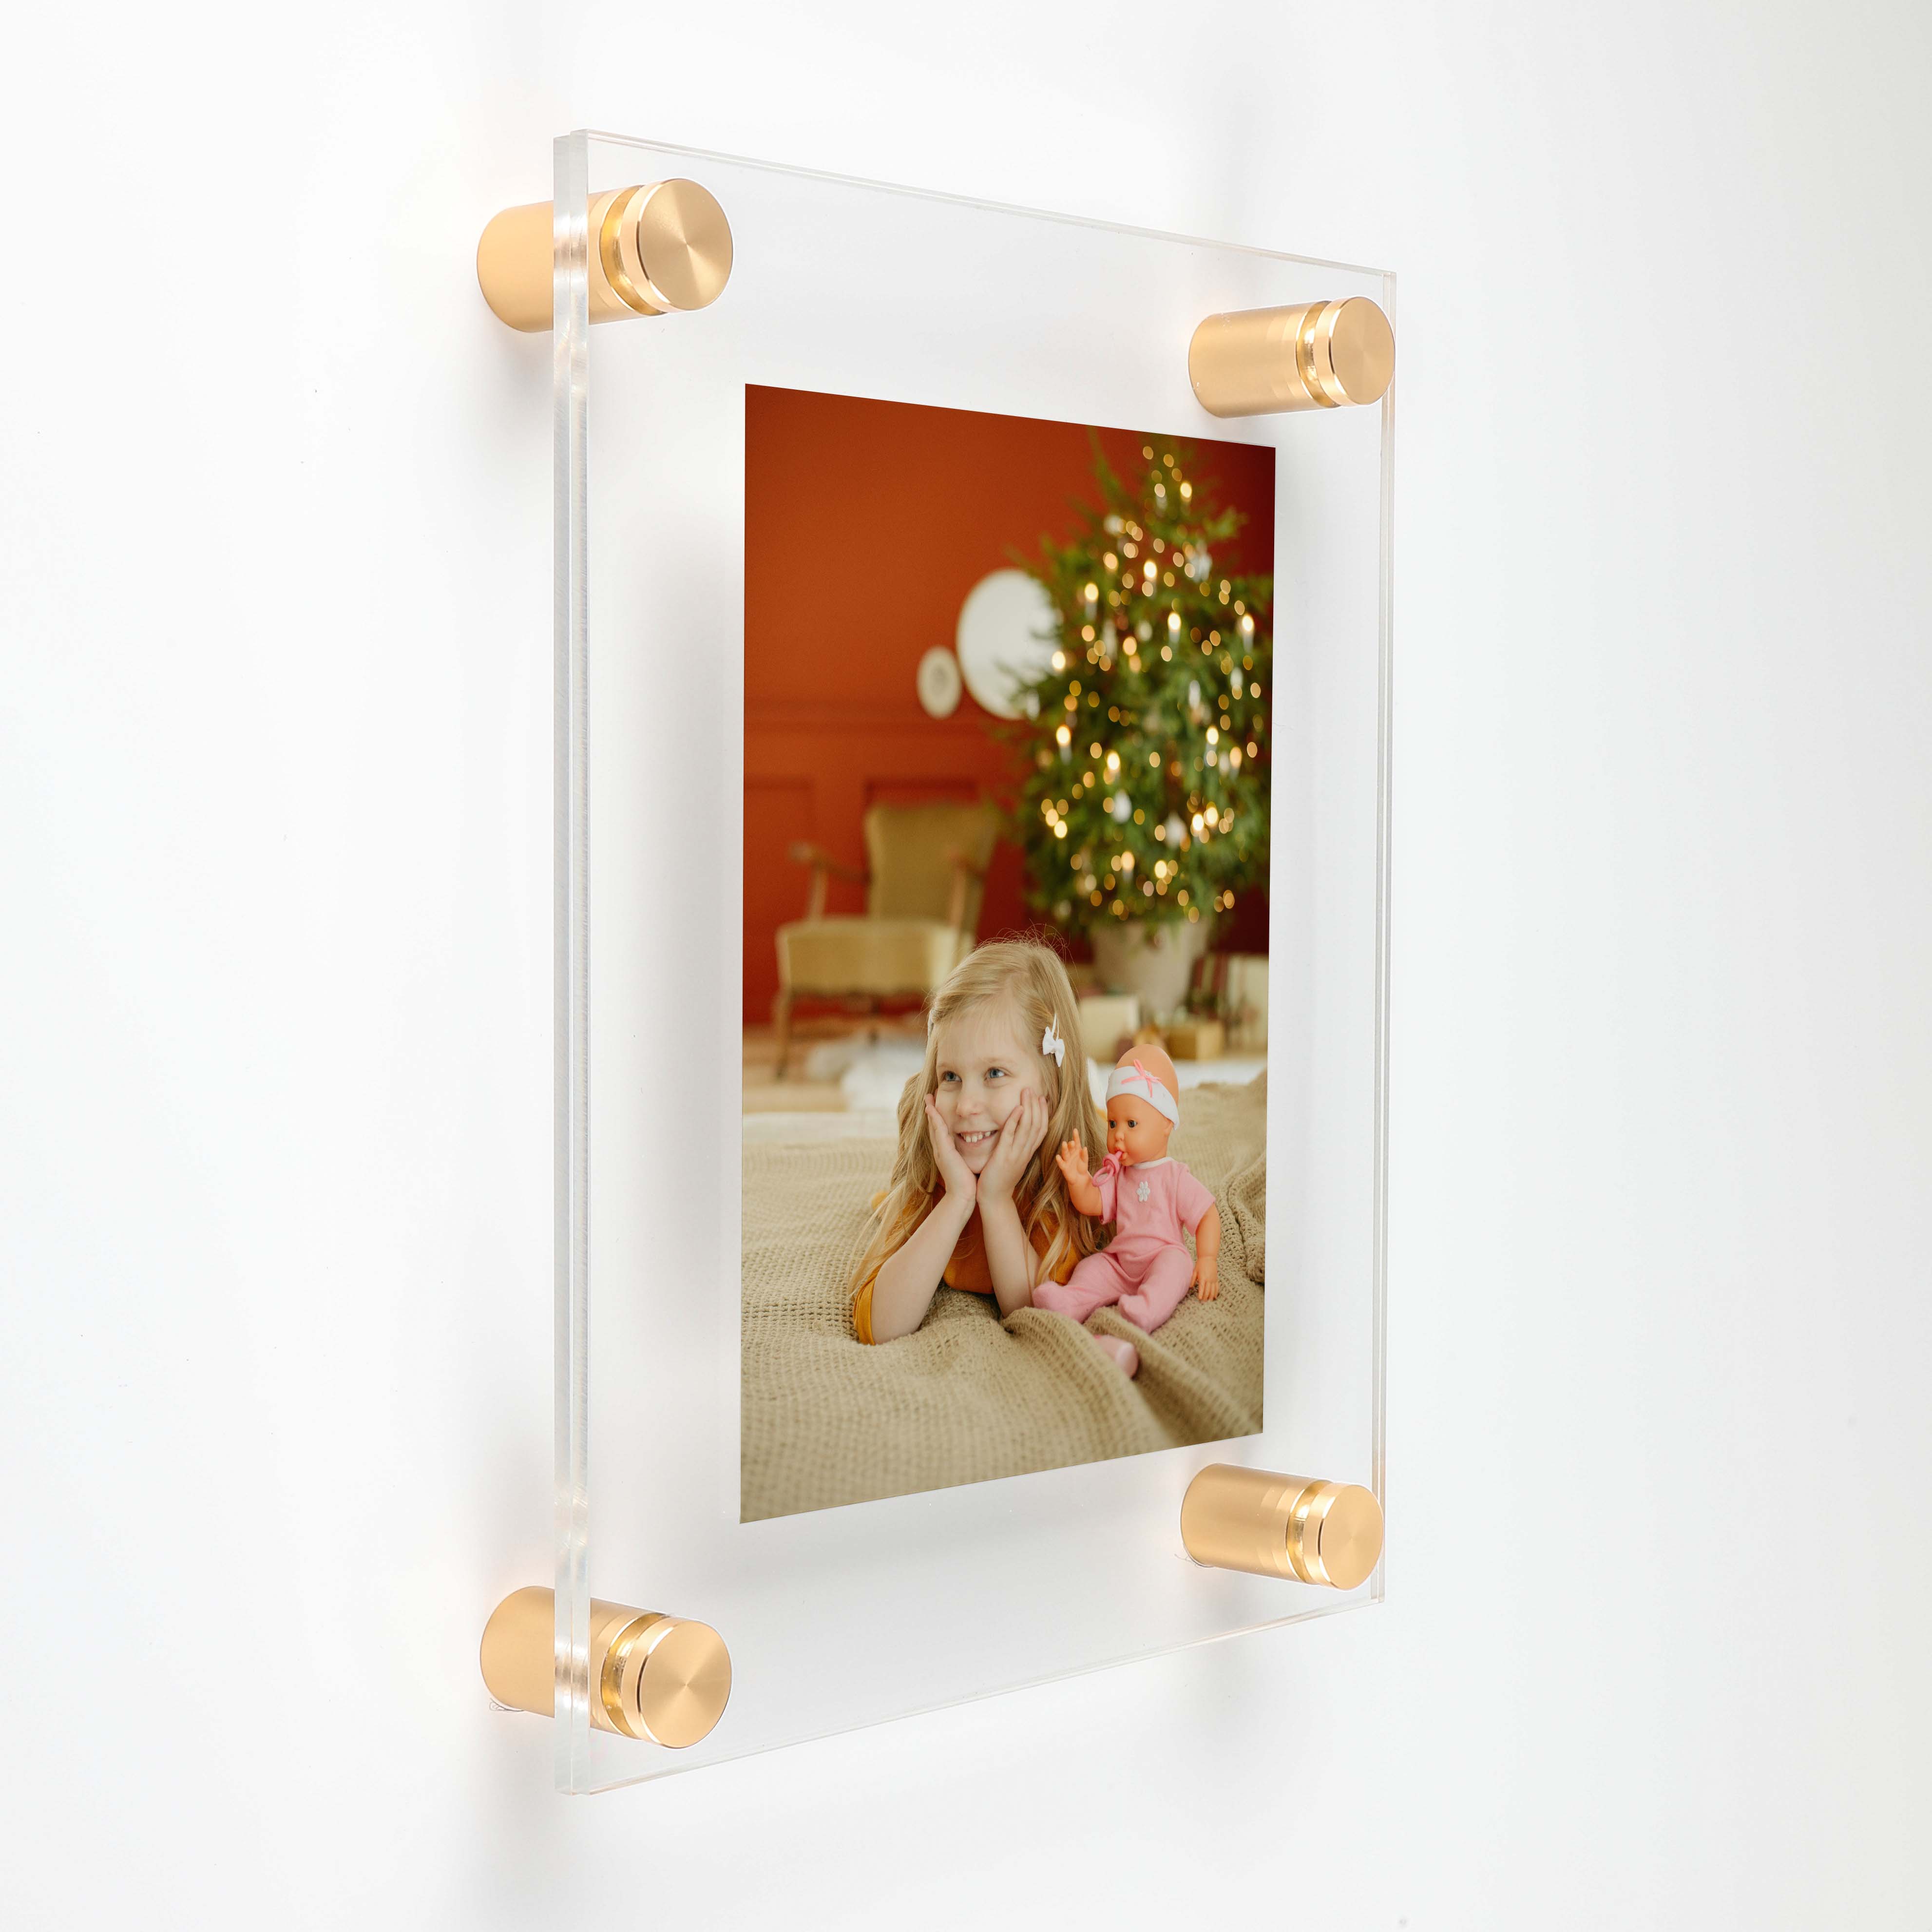 (2) 23-3/4'' x 29-3/4'' Clear Acrylics , Pre-Drilled With Polished Edges (Thick 3/16'' each), Wall Frame with (4) 5/8'' x 1'' Champagne Anodized Aluminum Standoffs includes Screws and Anchors